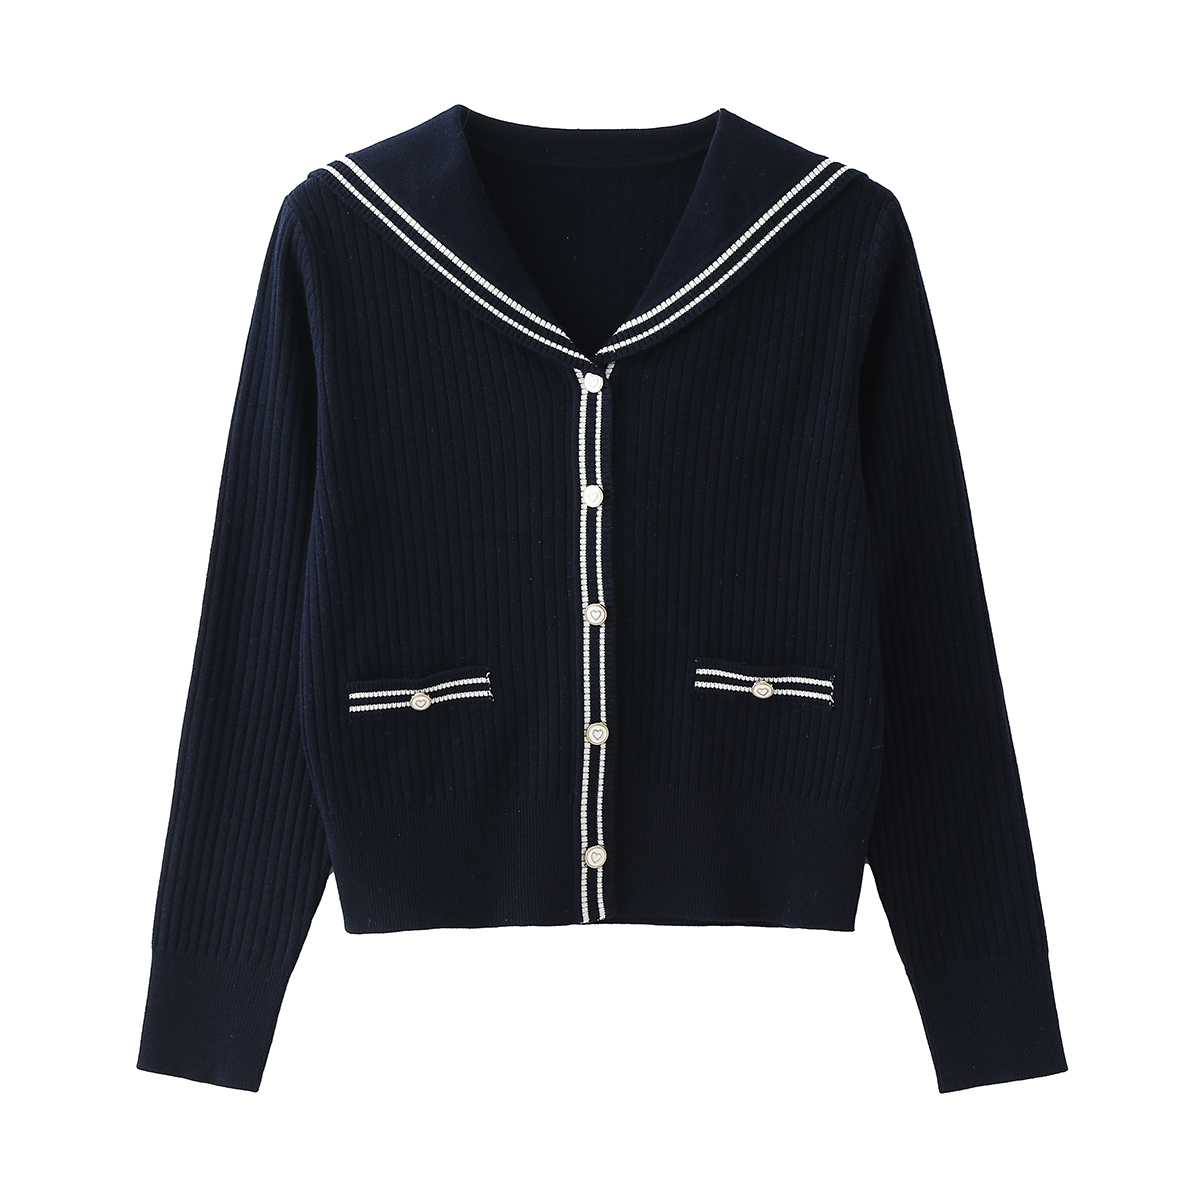 College Style Navy Knit Sweater2